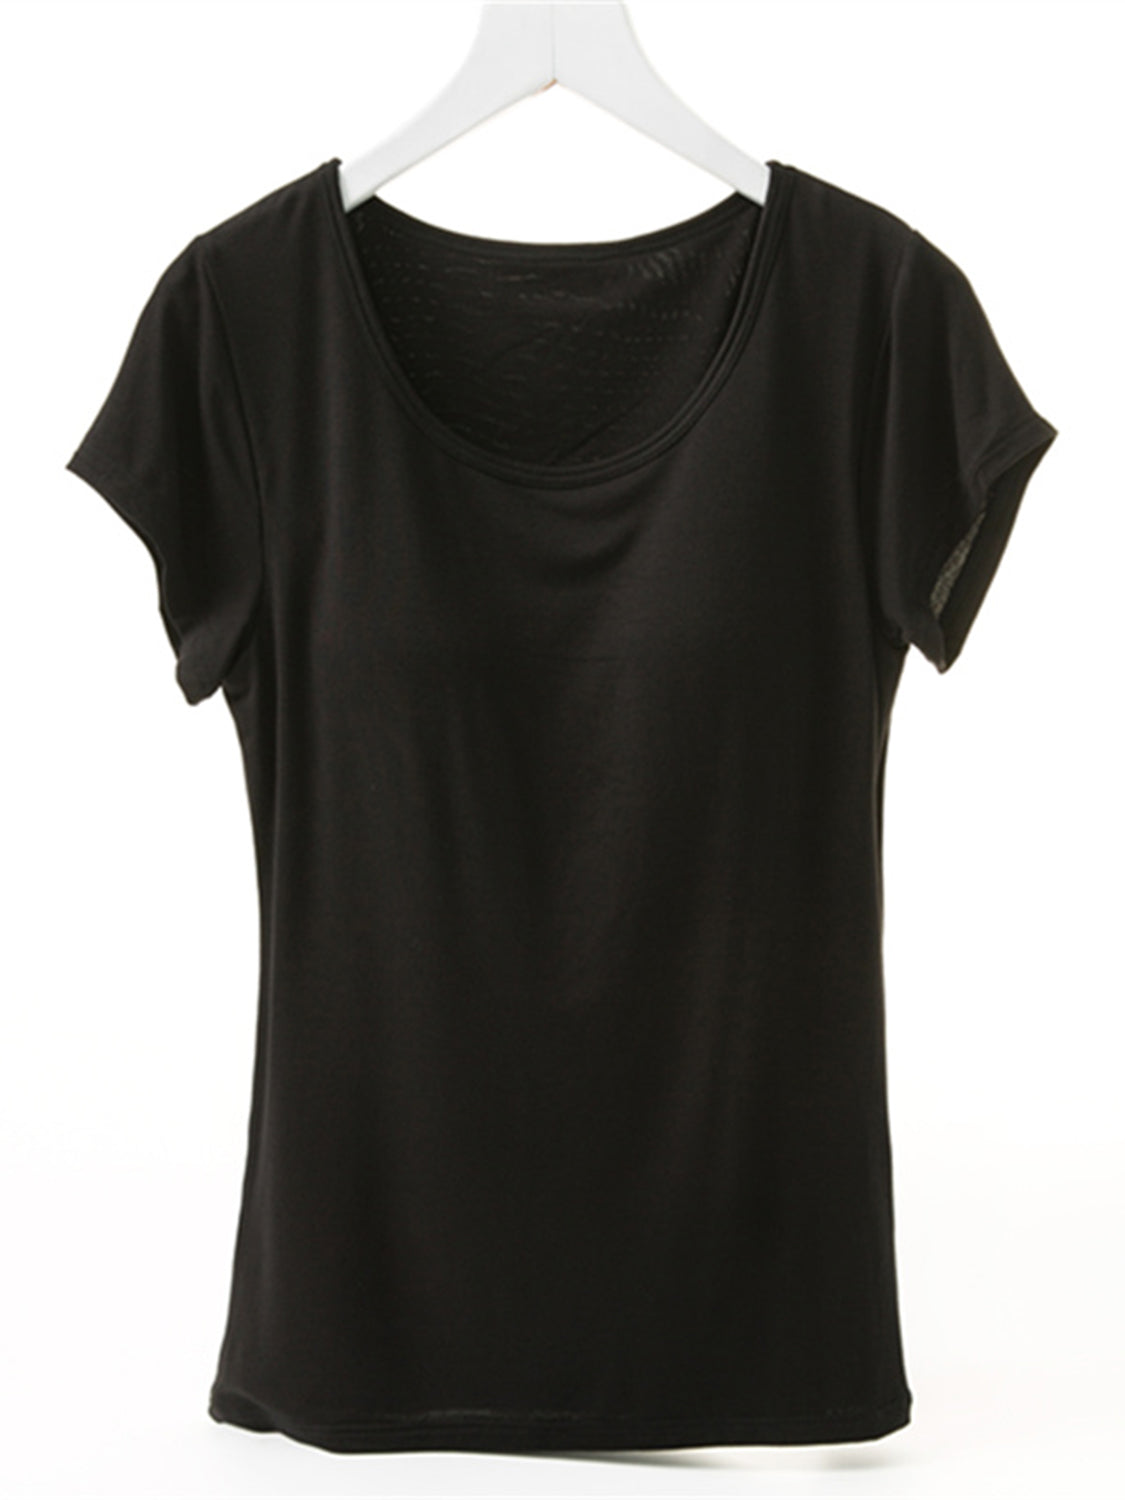 Black Round Neck Short Sleeve T-Shirt with Bra Sentient Beauty Fashions Apparel &amp; Accessories